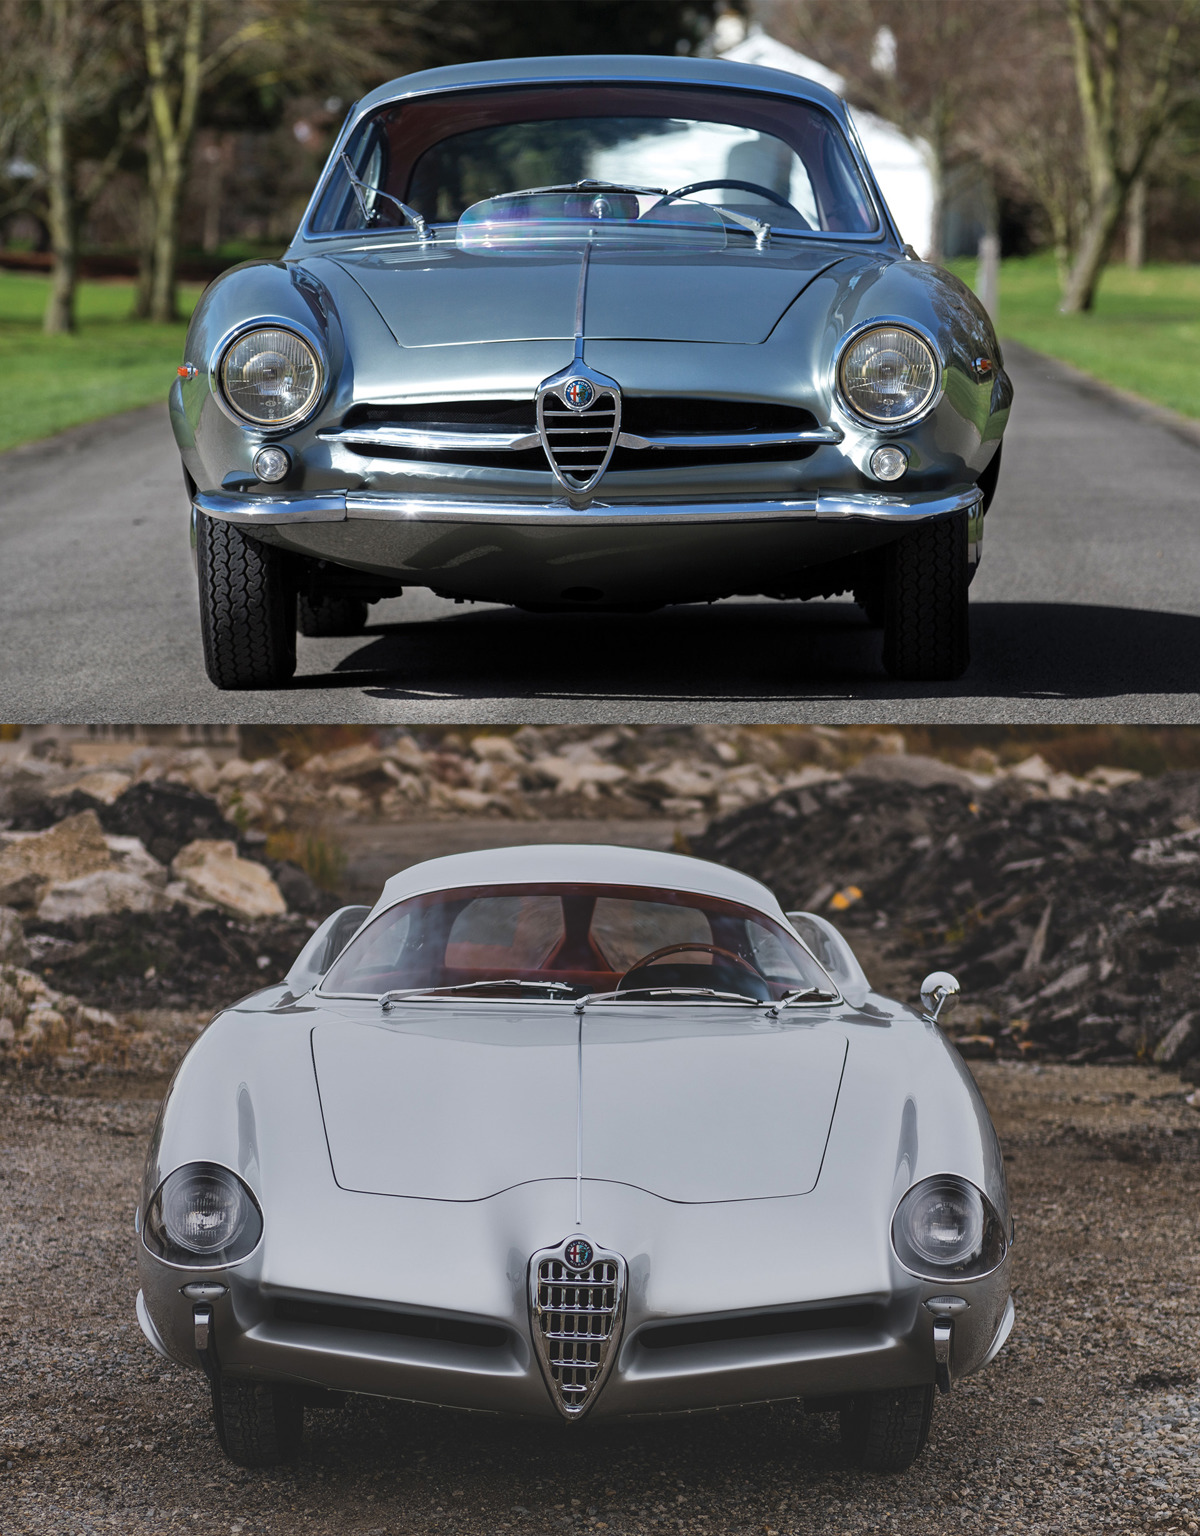 Alfa Romeo B.A.T. 5 7 and 9d Concept Cars offered at Sotheby’s Contemporary Art Evening Auction 2020